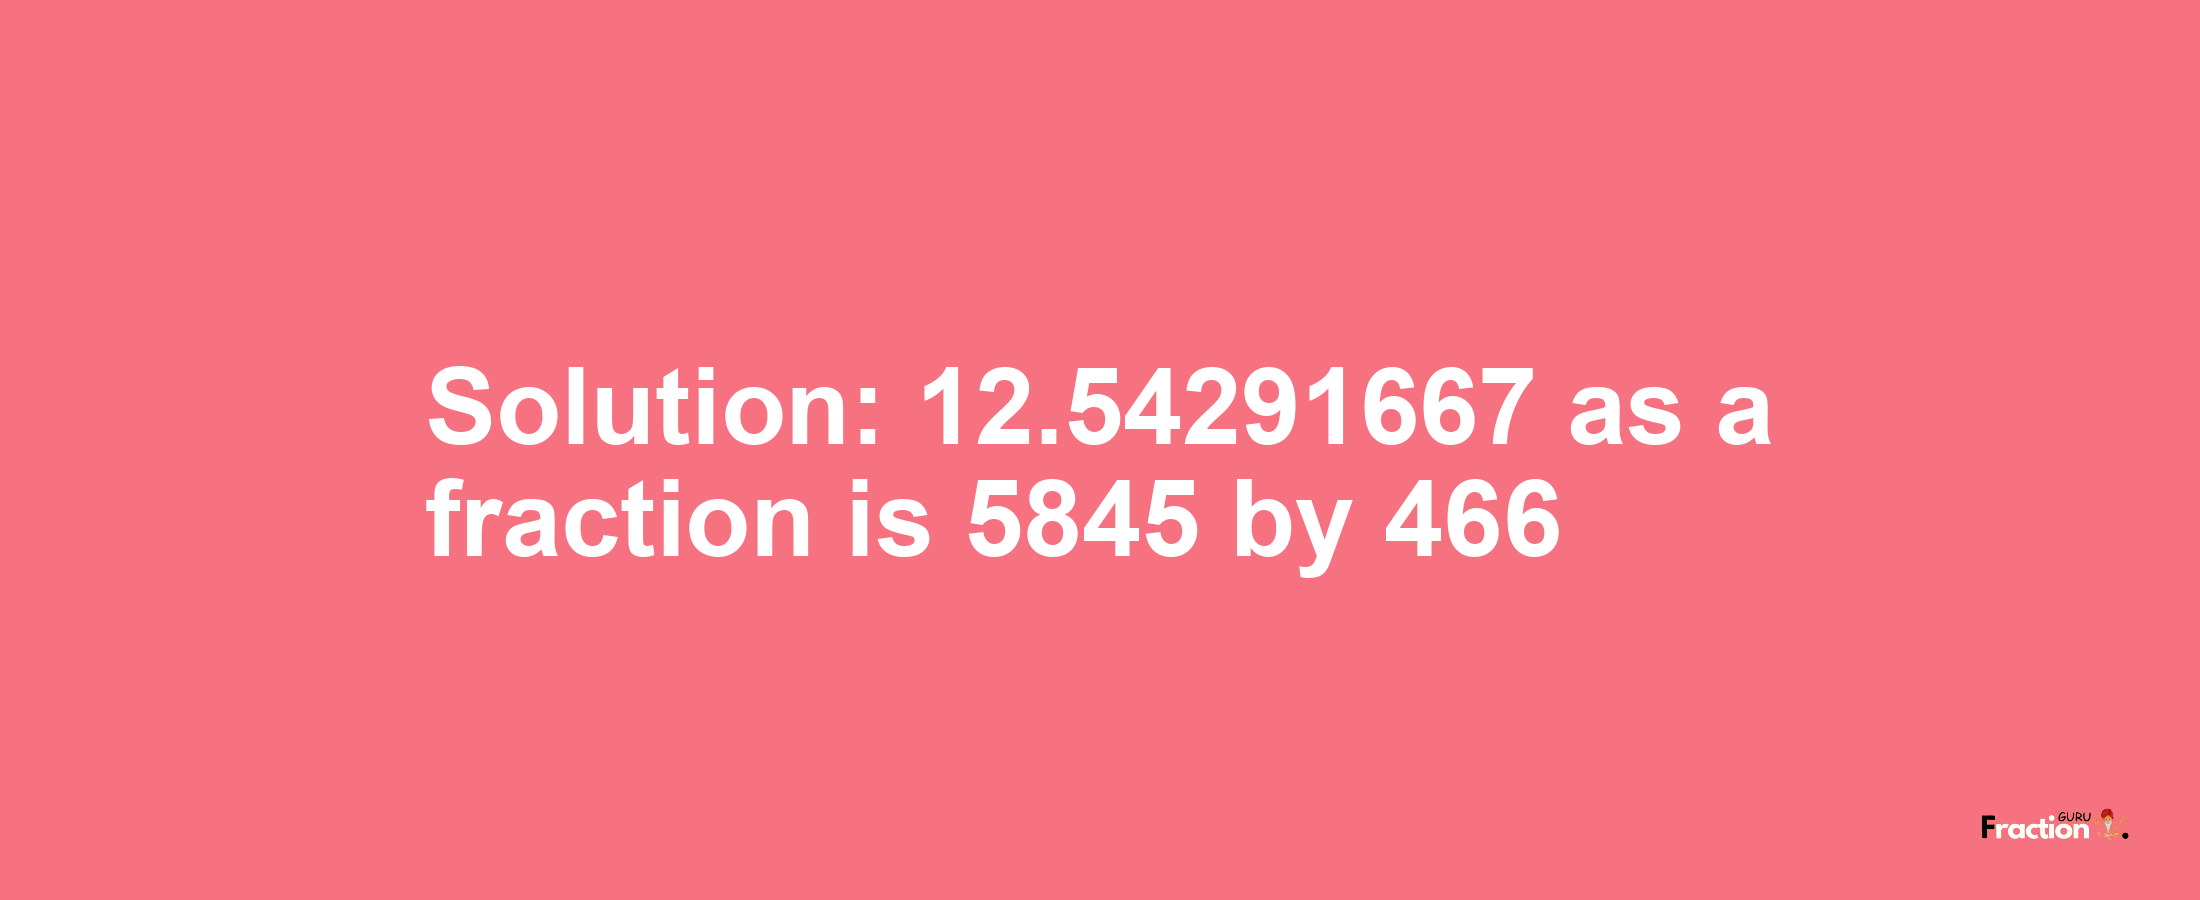 Solution:12.54291667 as a fraction is 5845/466